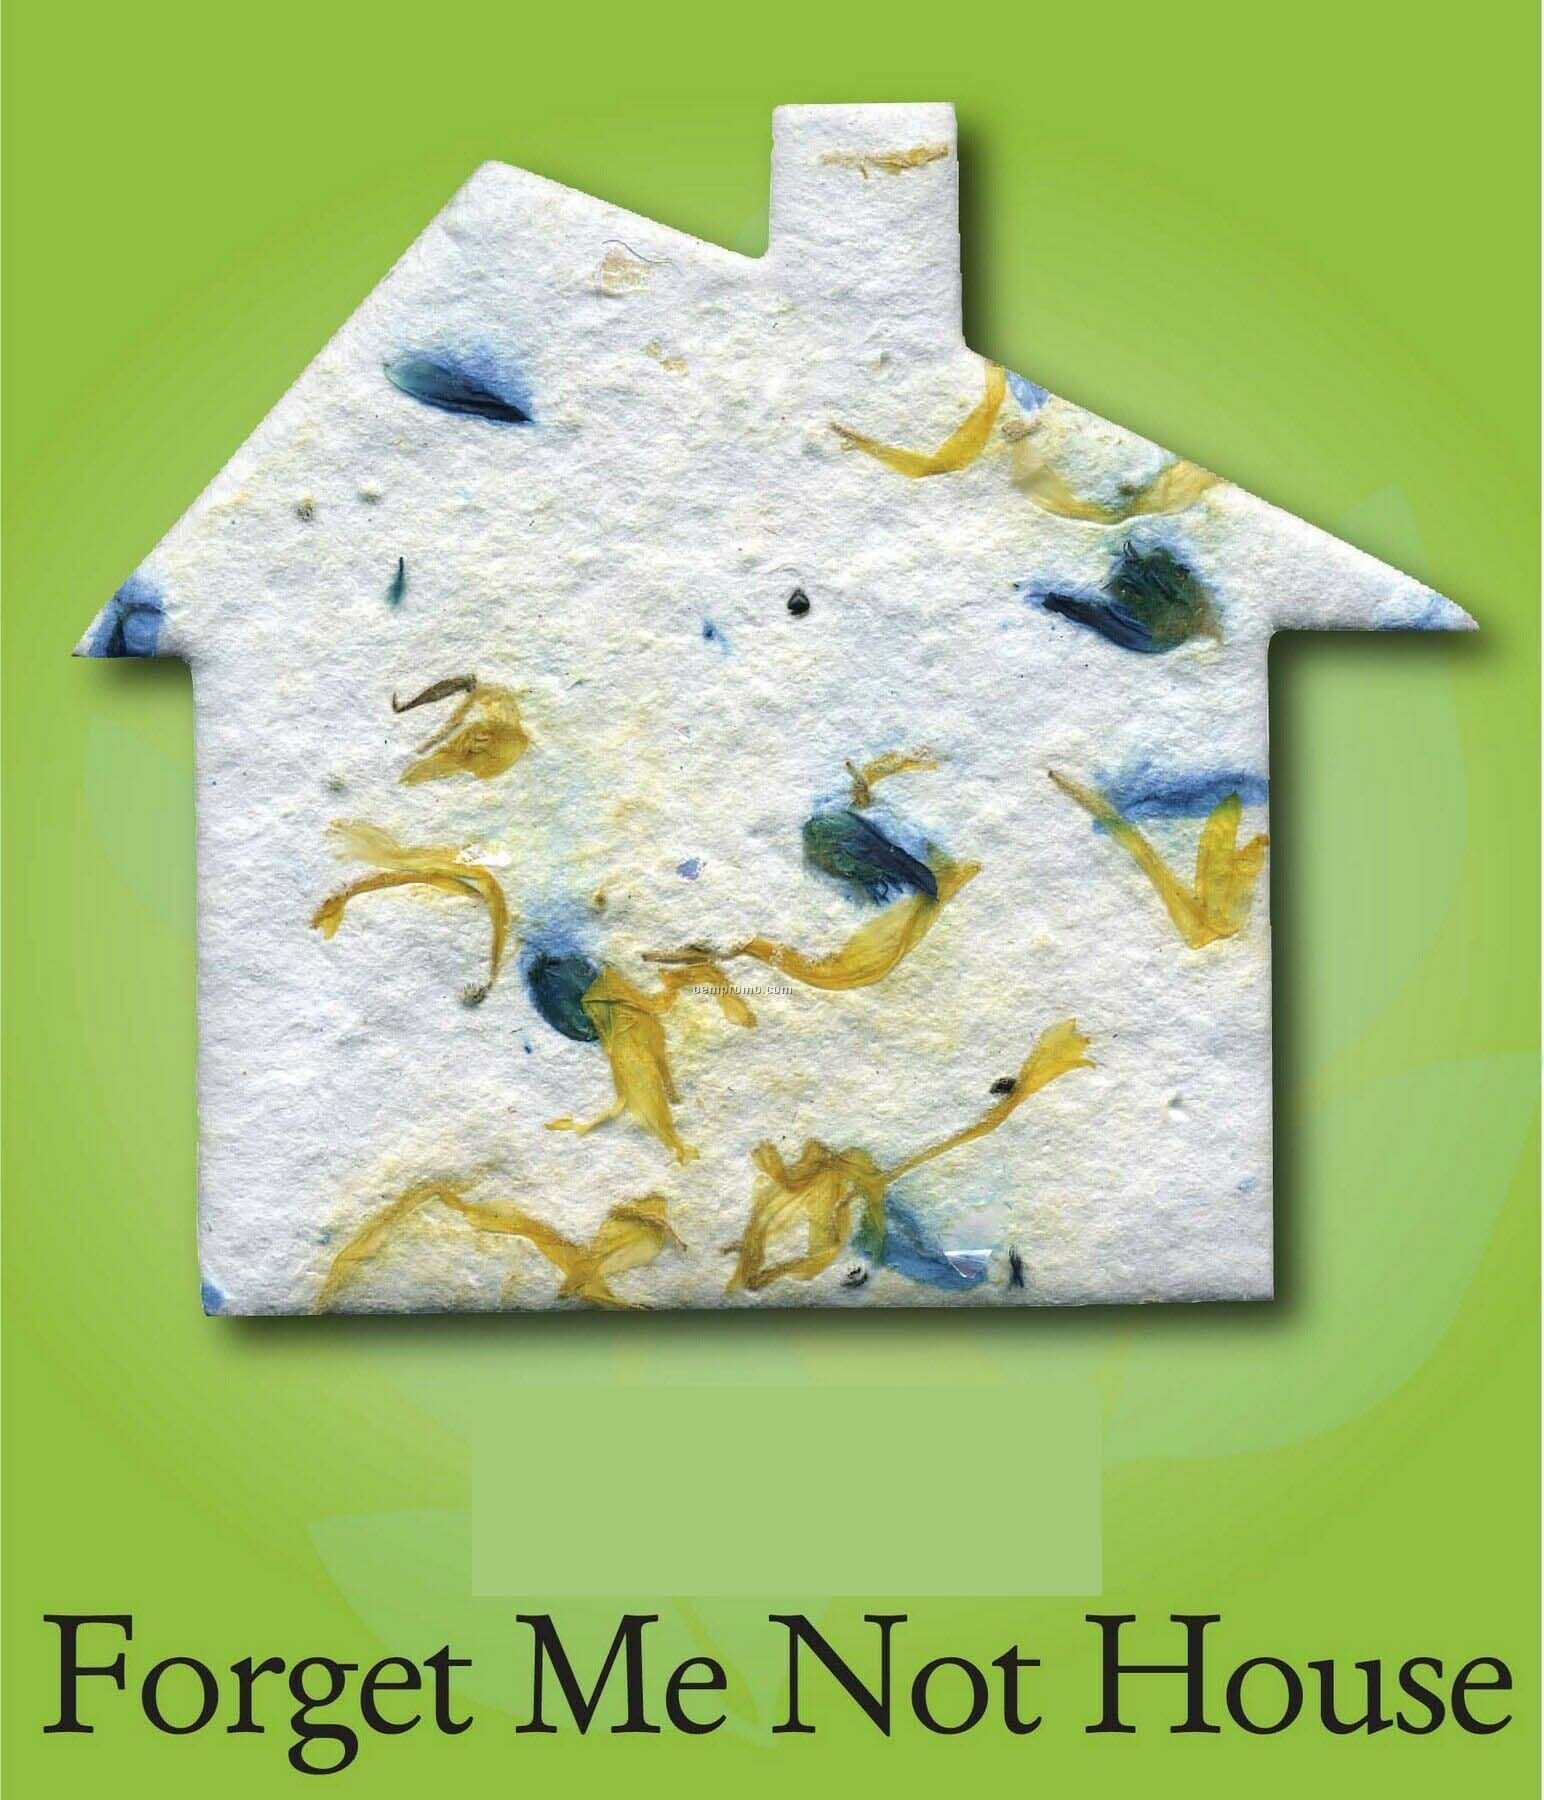 Forget Me Not House Ornament With Embedded Seed